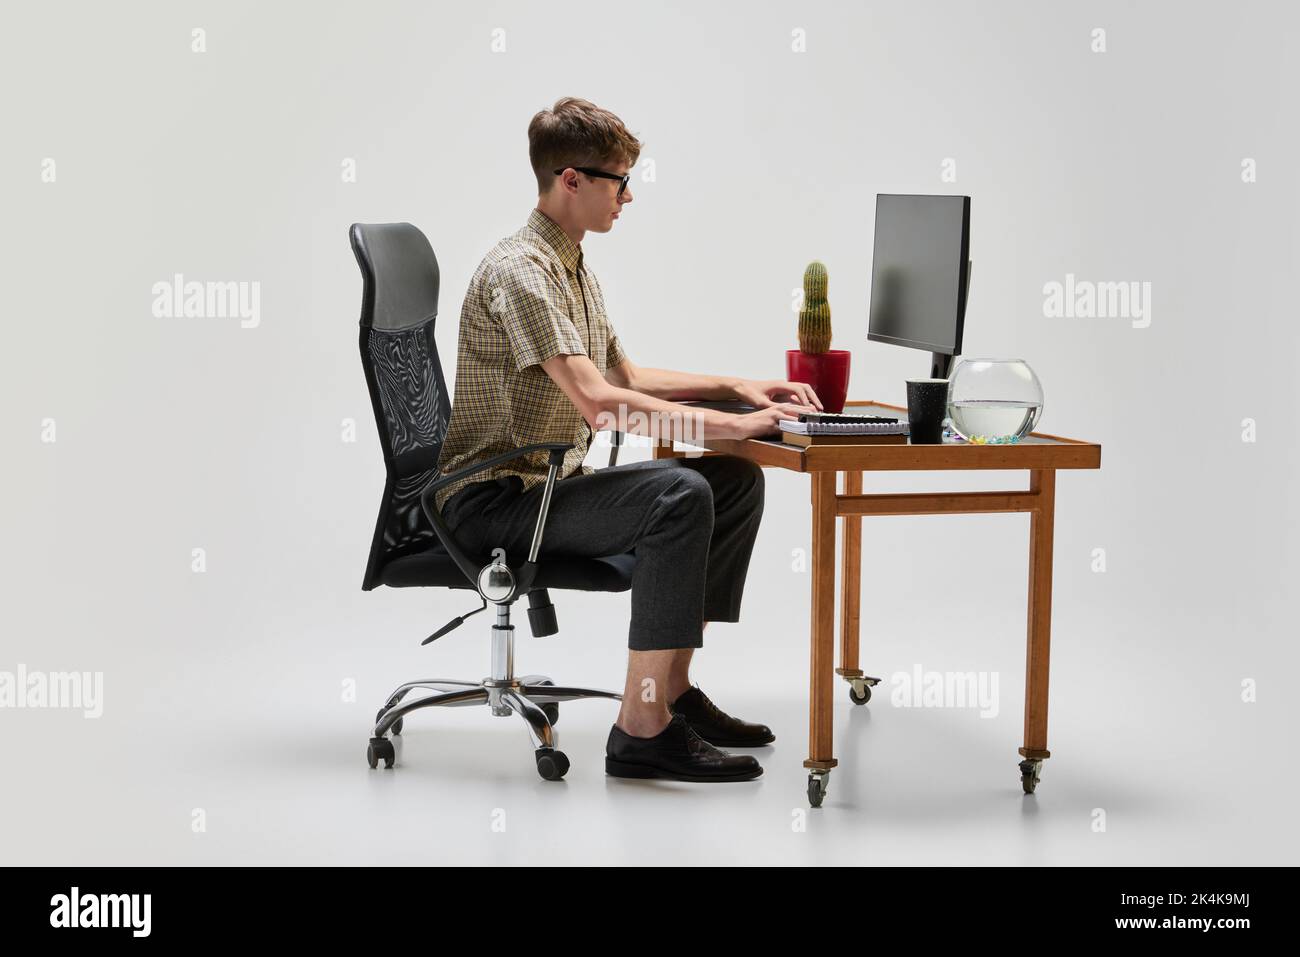 Young programmer. Portrait of smart and serious student sitting at computer desk and studying. Studying, education, youth, remote workplace concept Stock Photo